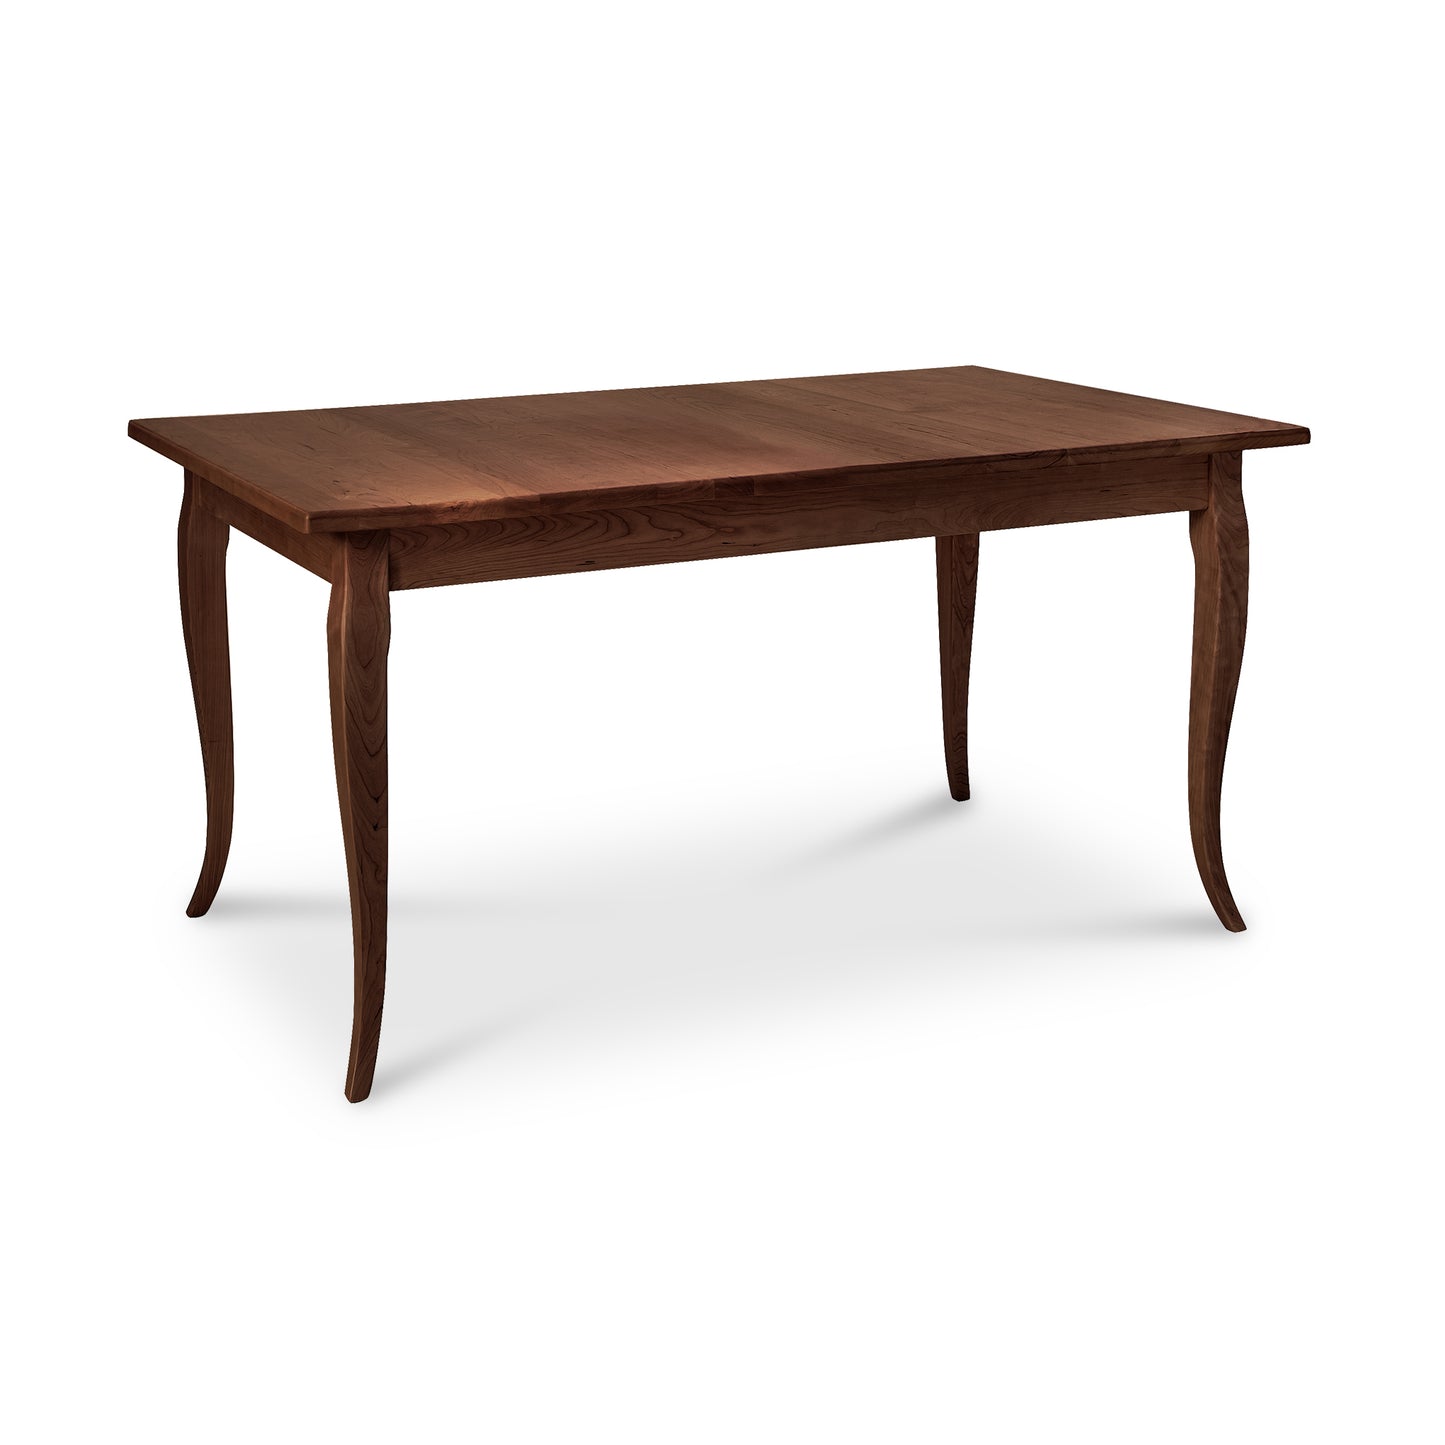 A French Country Solid Top Dining Table with a wooden top and legs made by Lyndon Furniture.